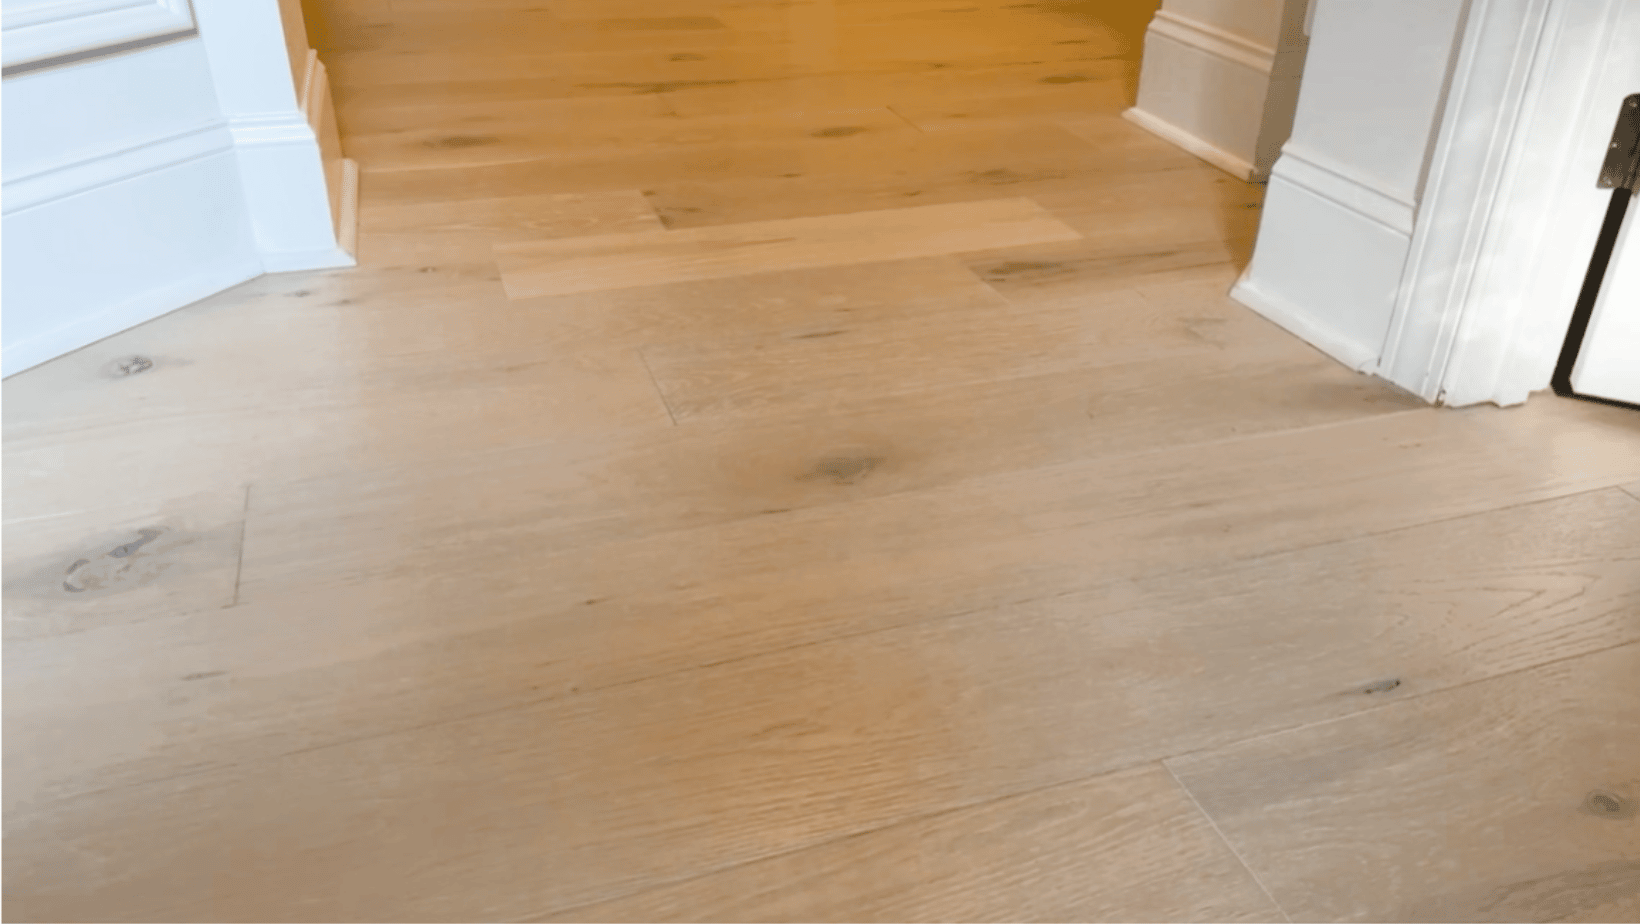 Lessons Learned Installing Wood Floors